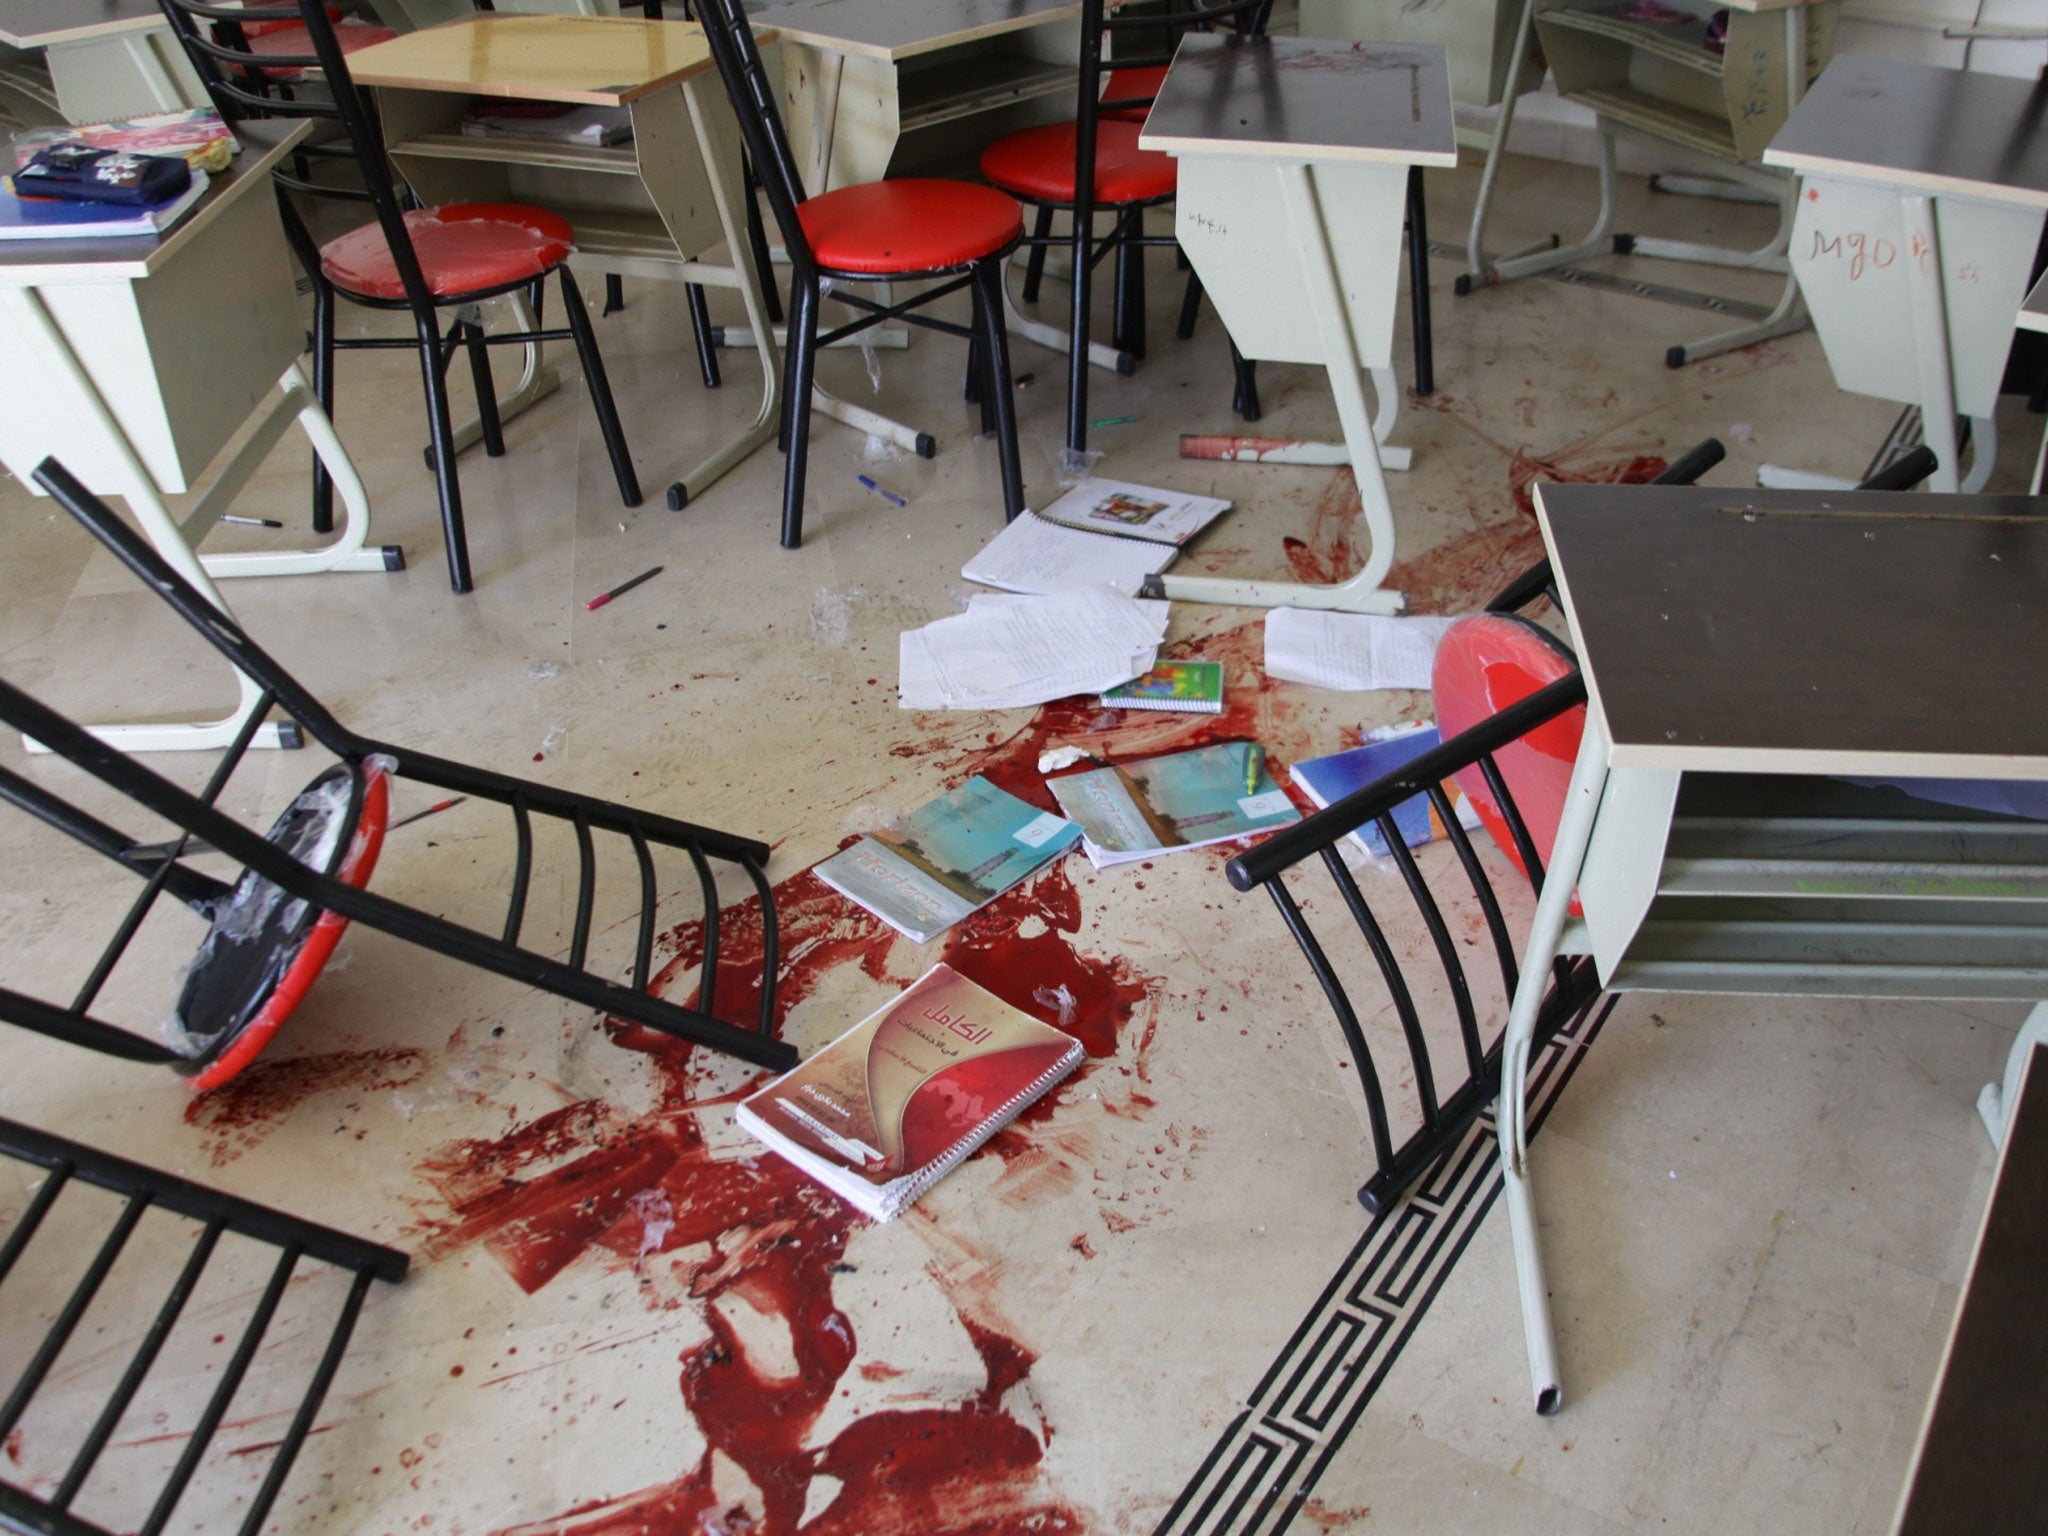 There were six children killed in the shelling, while blood marked many places in the school hit